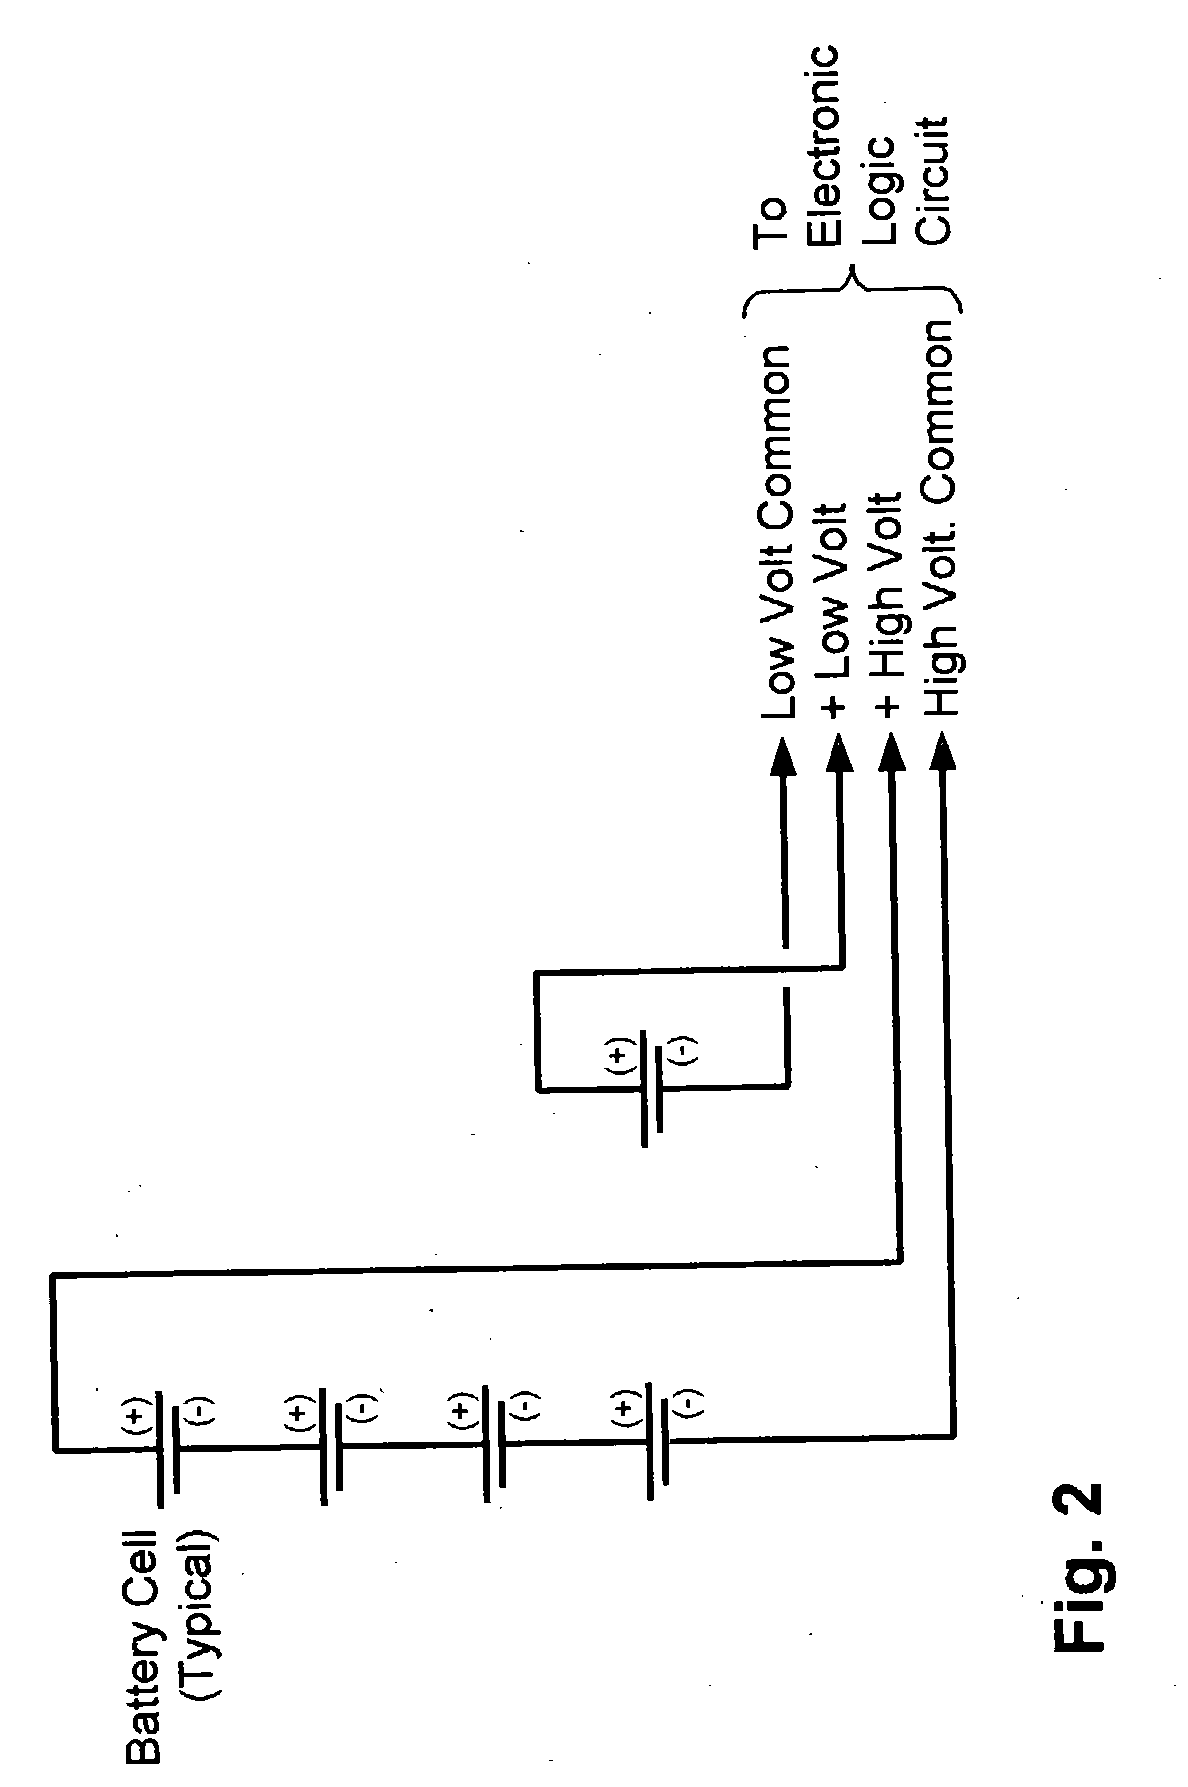 Self-contained electronic pressure monitoring and shutdown device